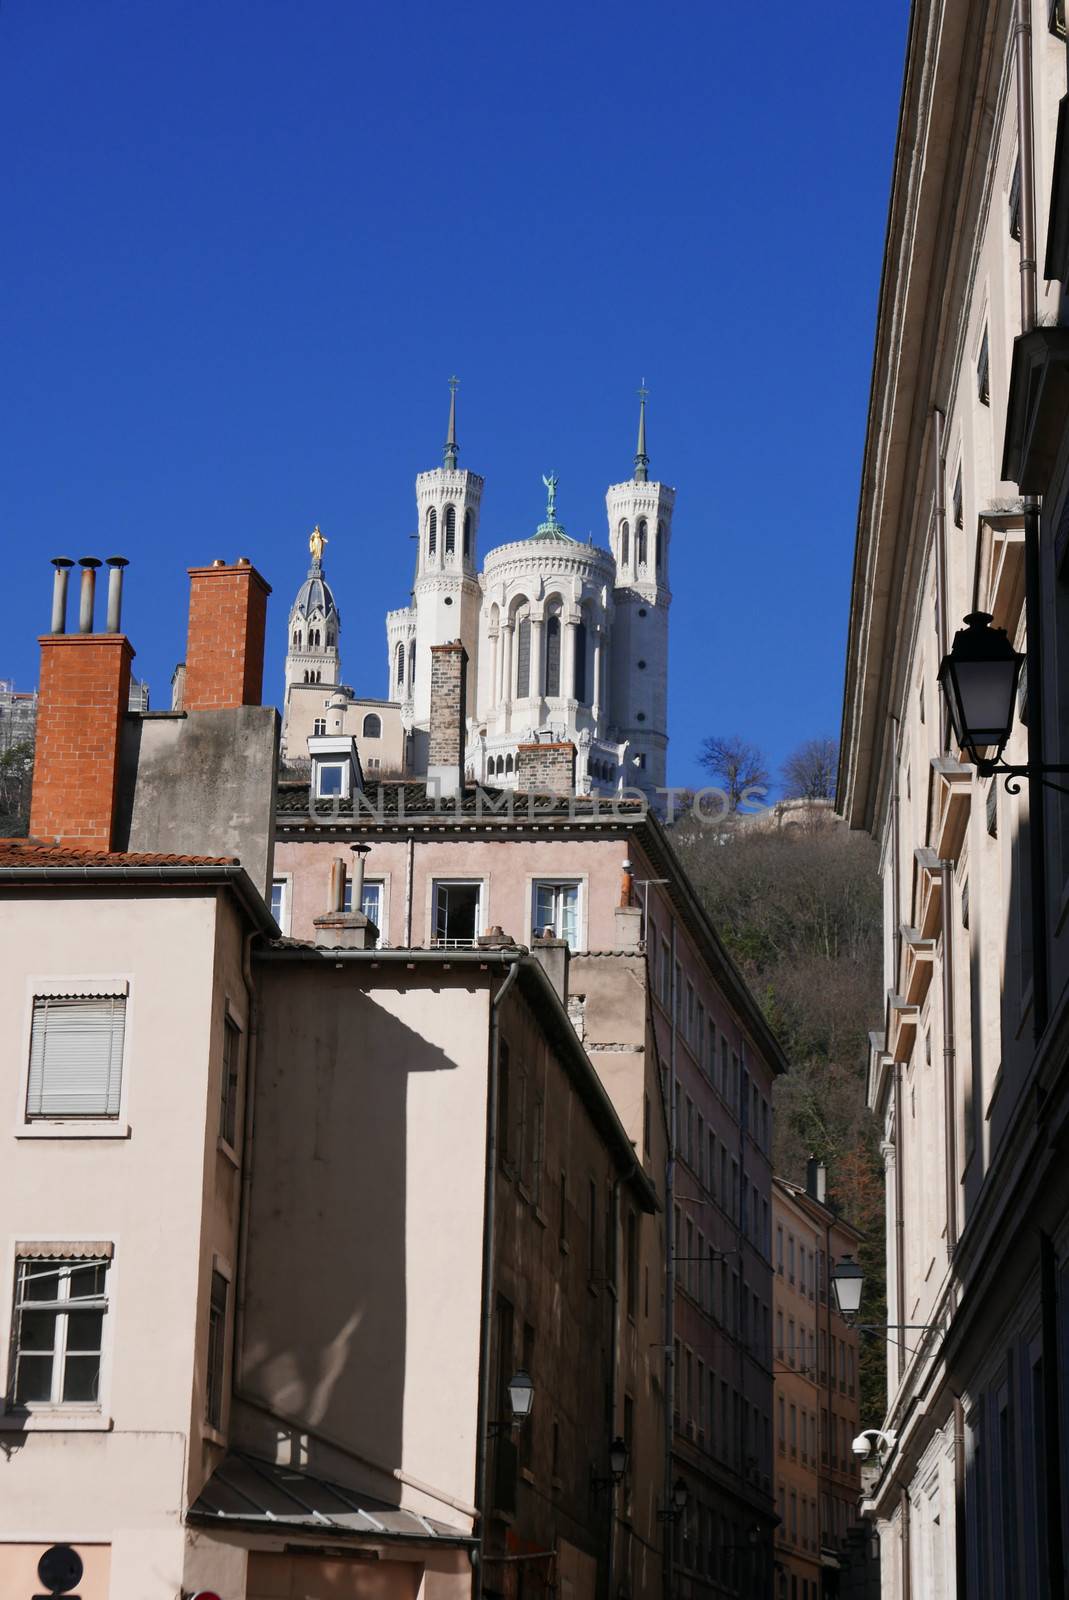 Tourism in the city of lyon, rhone alpes region in france